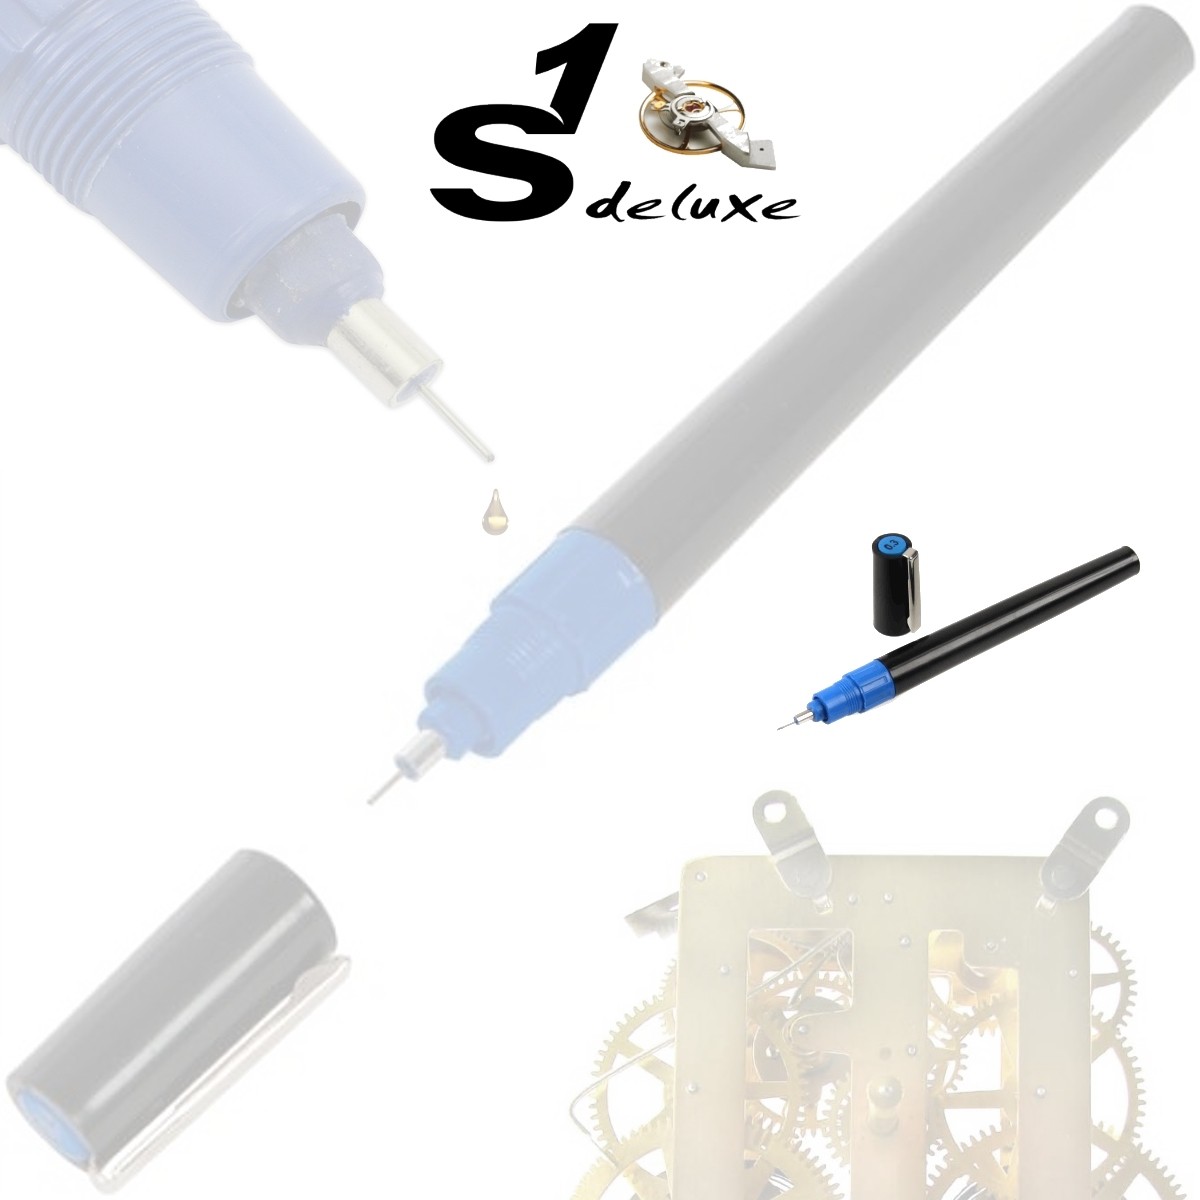 S1 DELUXE needle point automatic oiler pen 0.3 mm - Watchmakers tool to  oiling mechanical watch movements